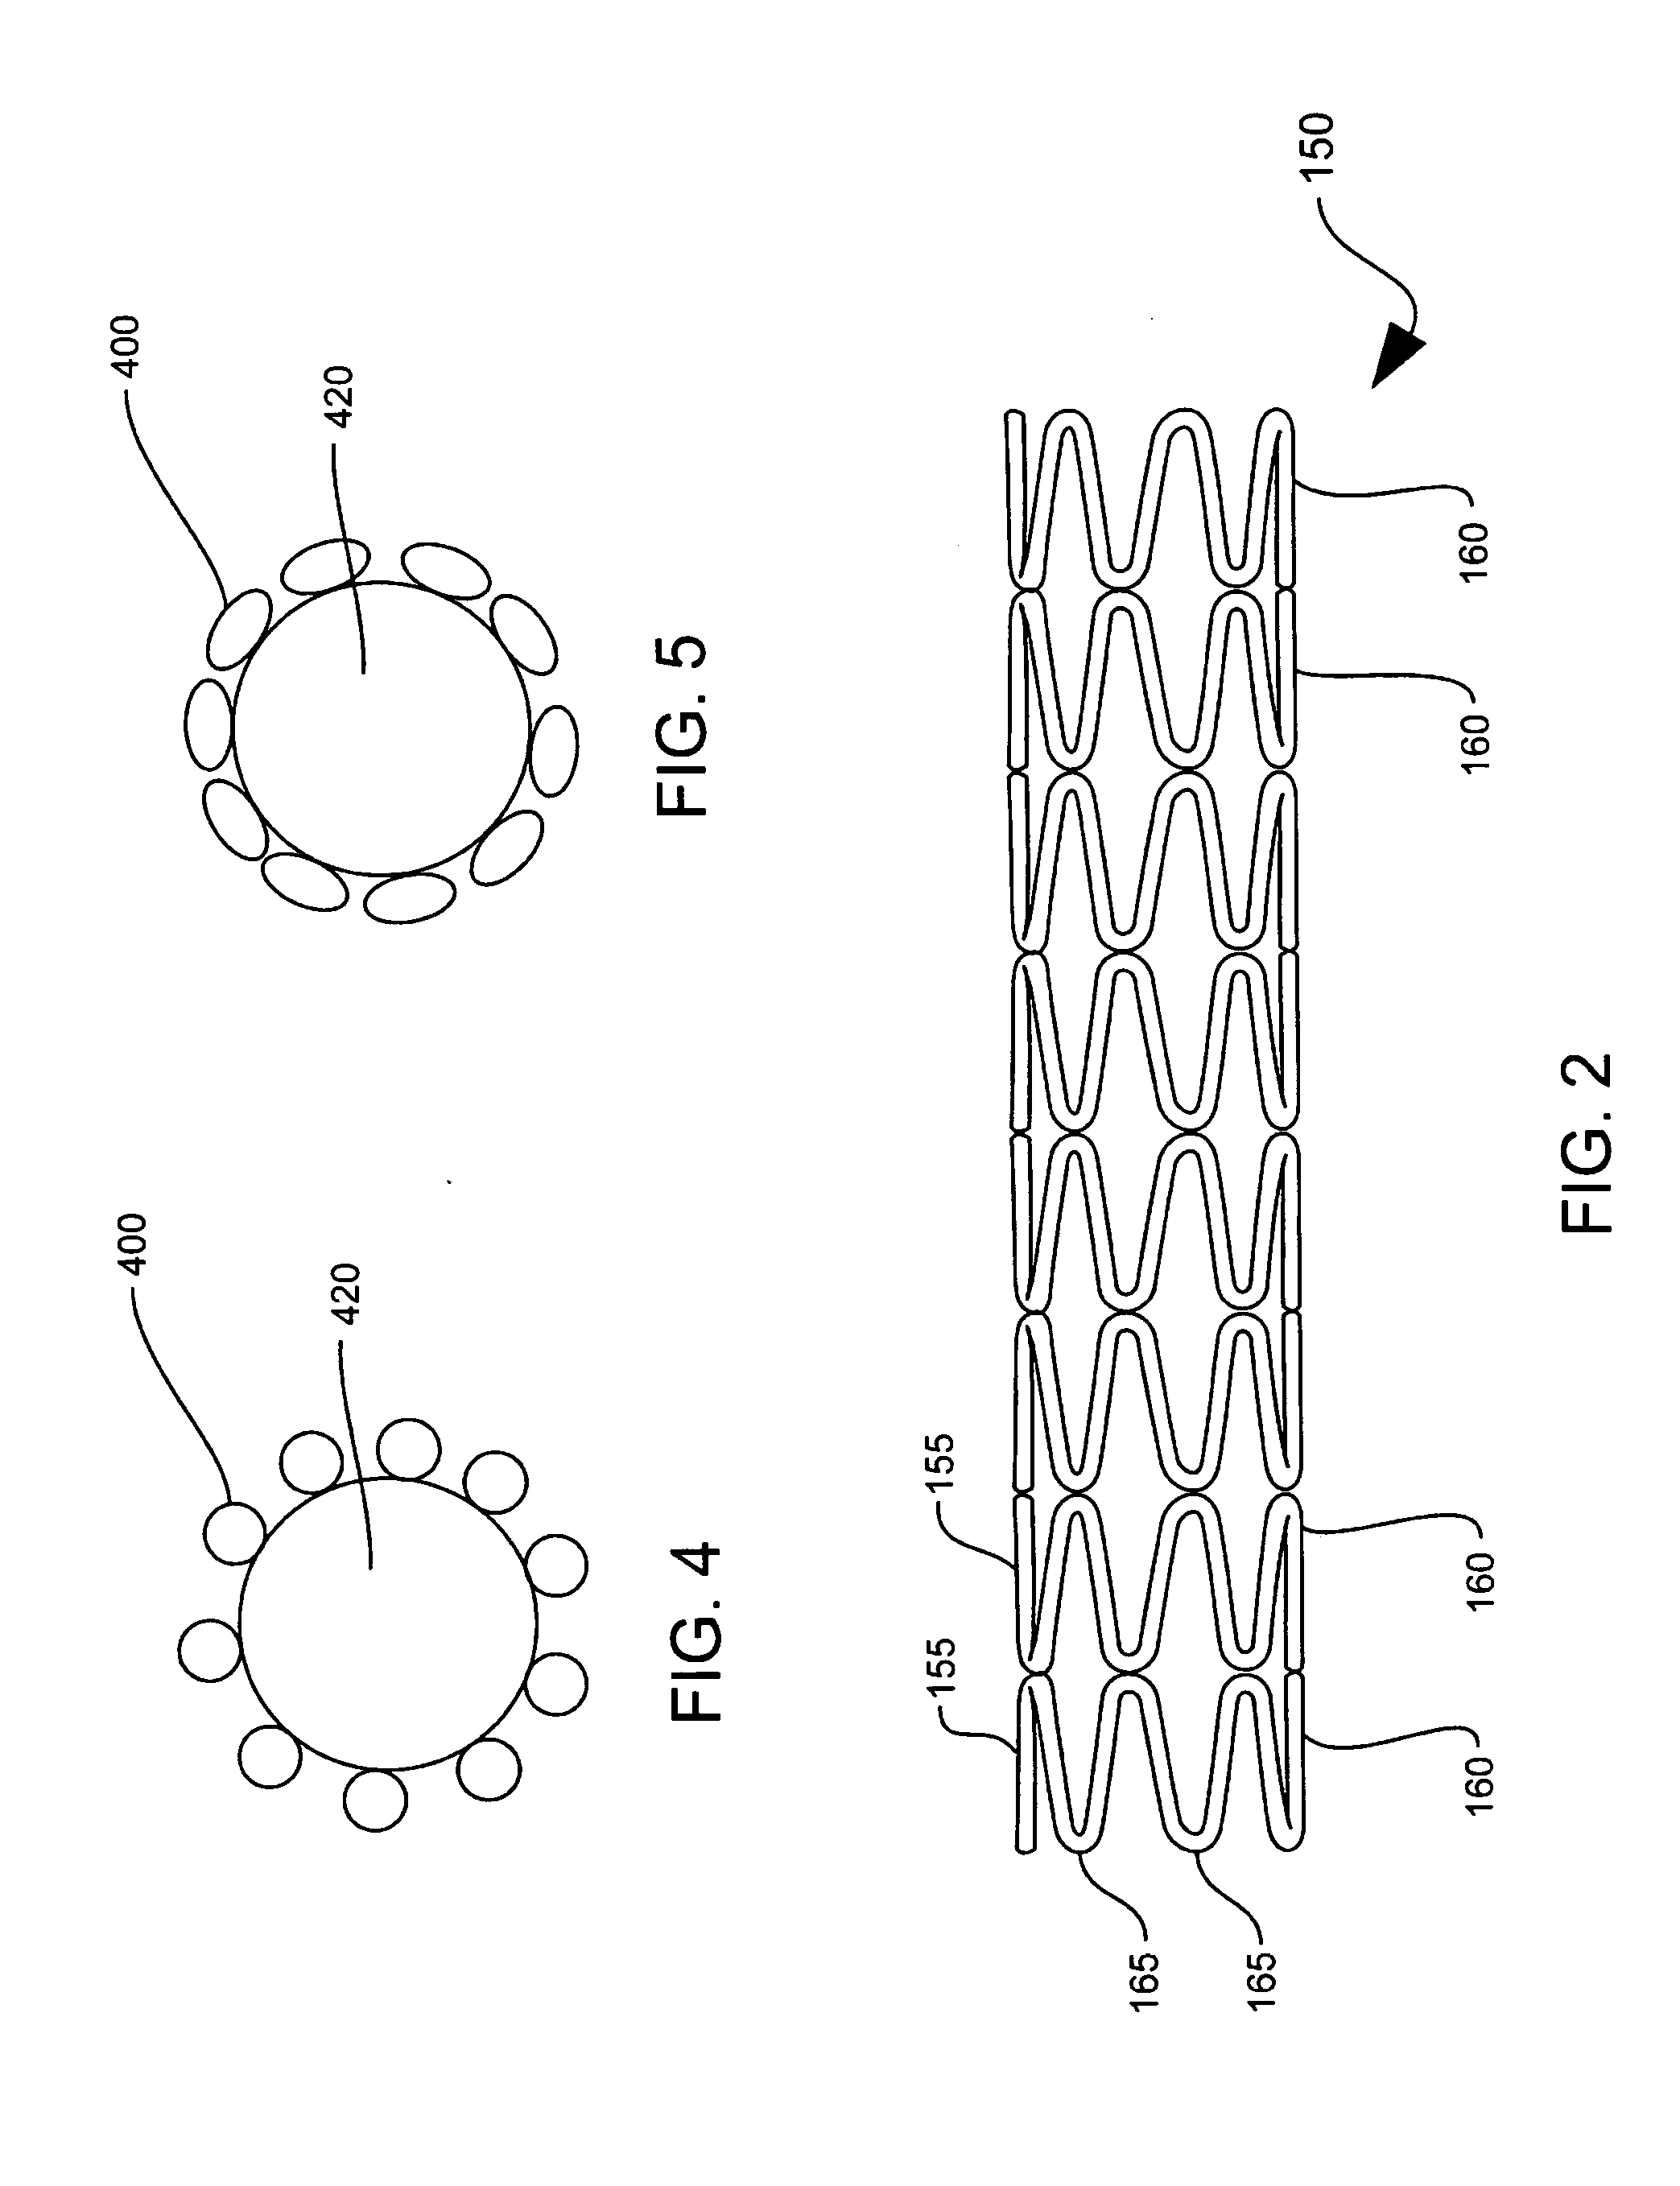 Stent with improved drug loading capacity